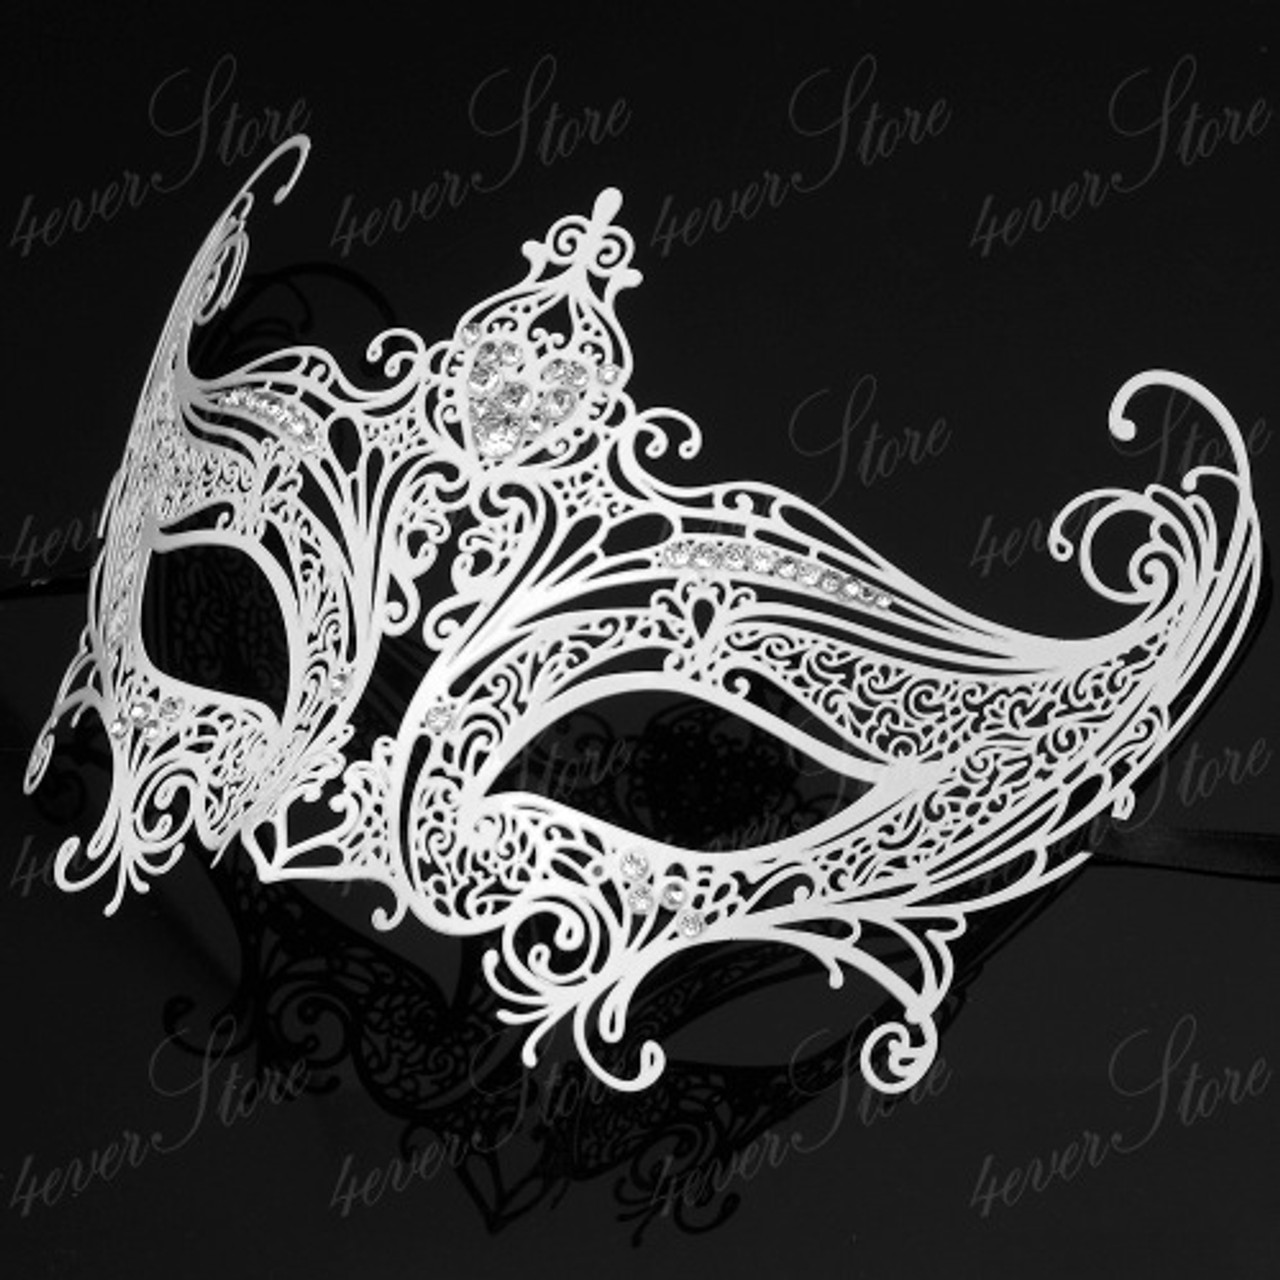 New Masquerade Masks for Prom King and Queen Masks | FREE SHIP